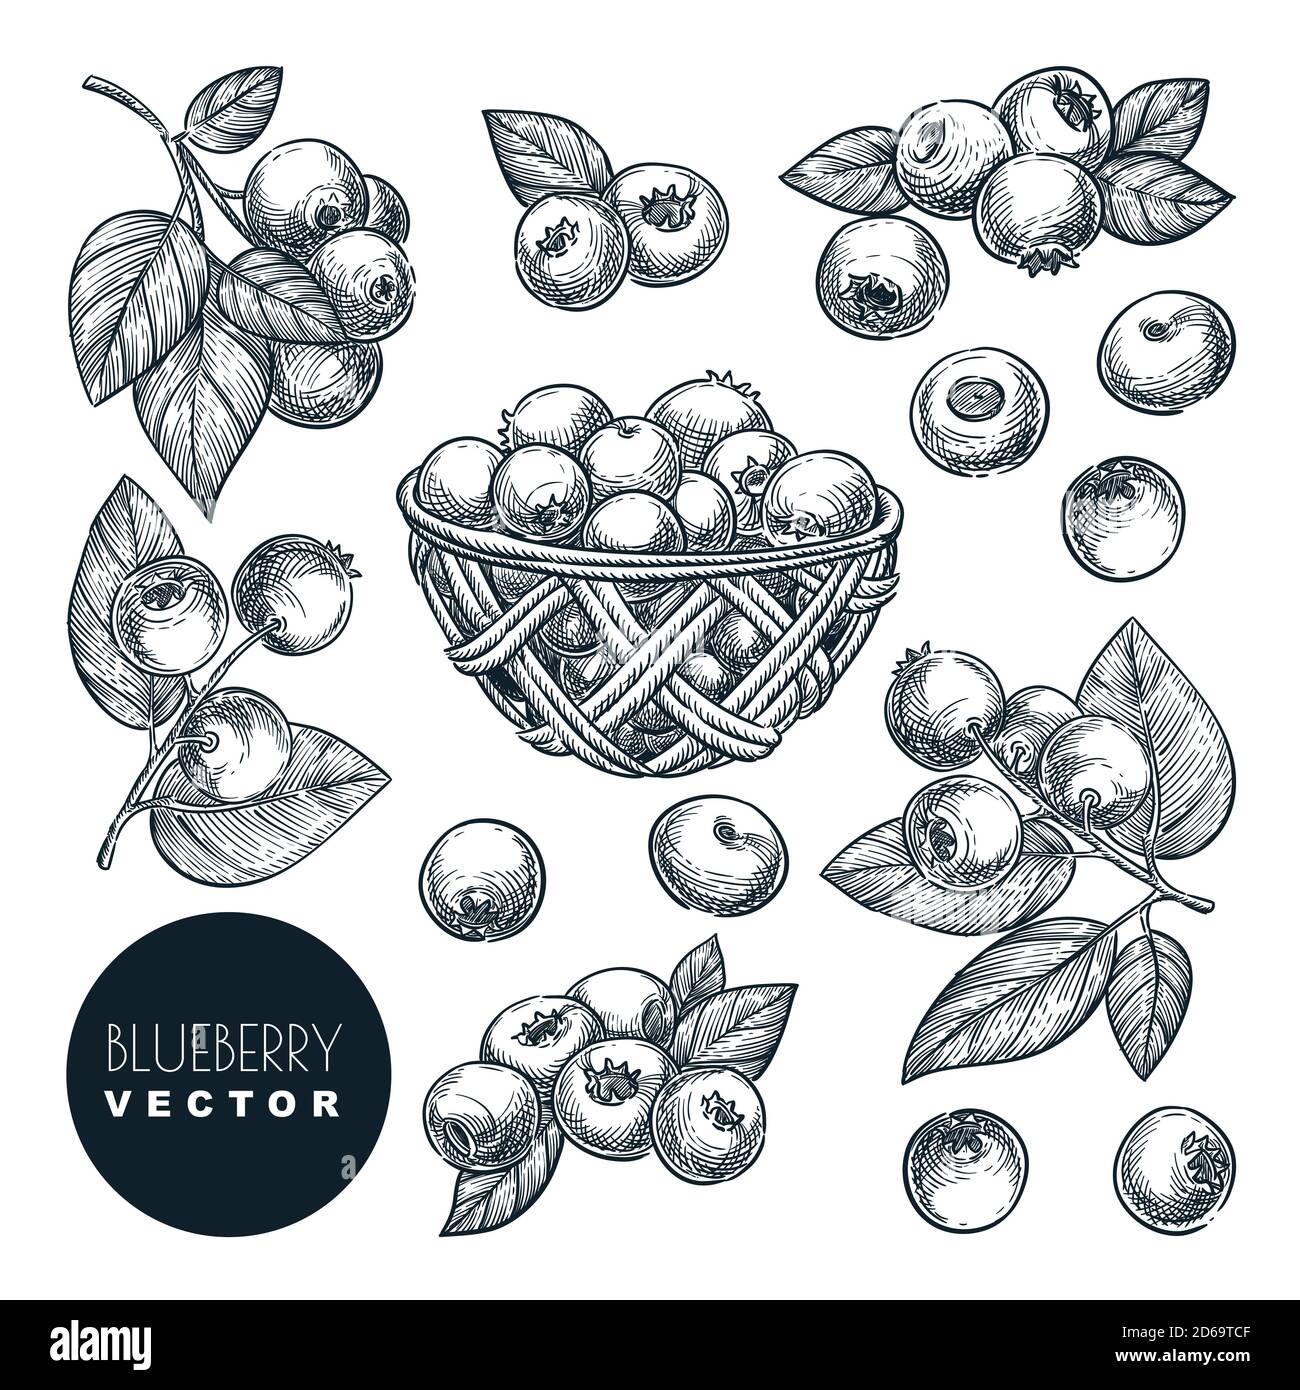 Blueberry berries sketch vector illustration. Bog whortleberry harvest in wooden basket. Hand drawn agriculture and farm isolated design elements. Stock Vector